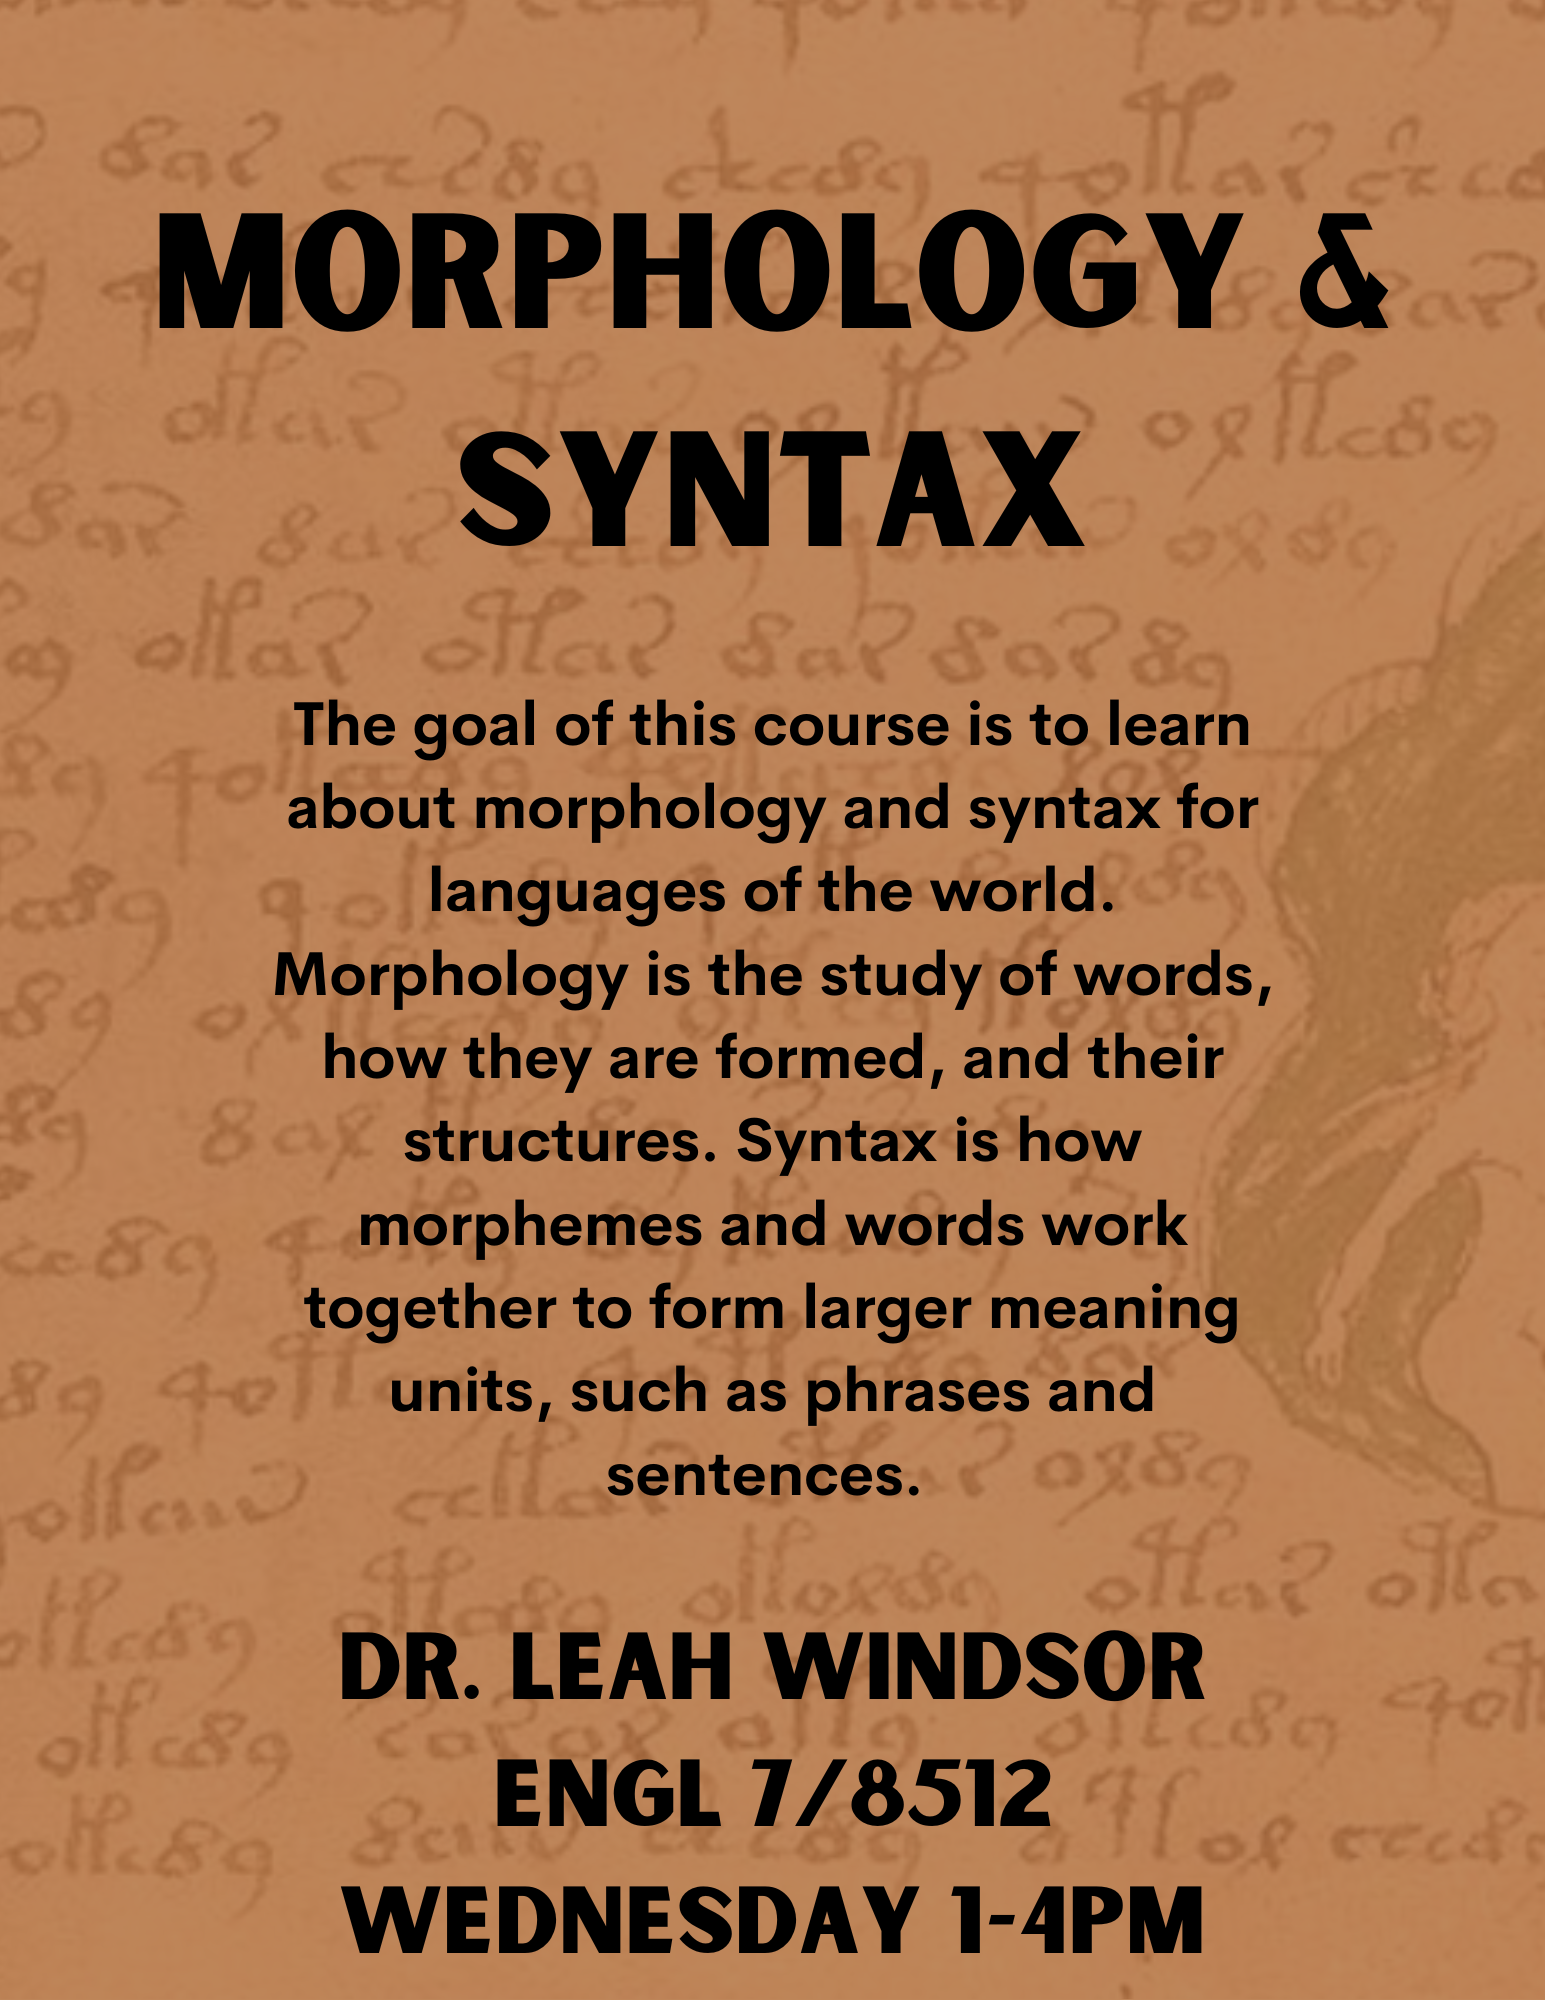 Morphology and Syntax